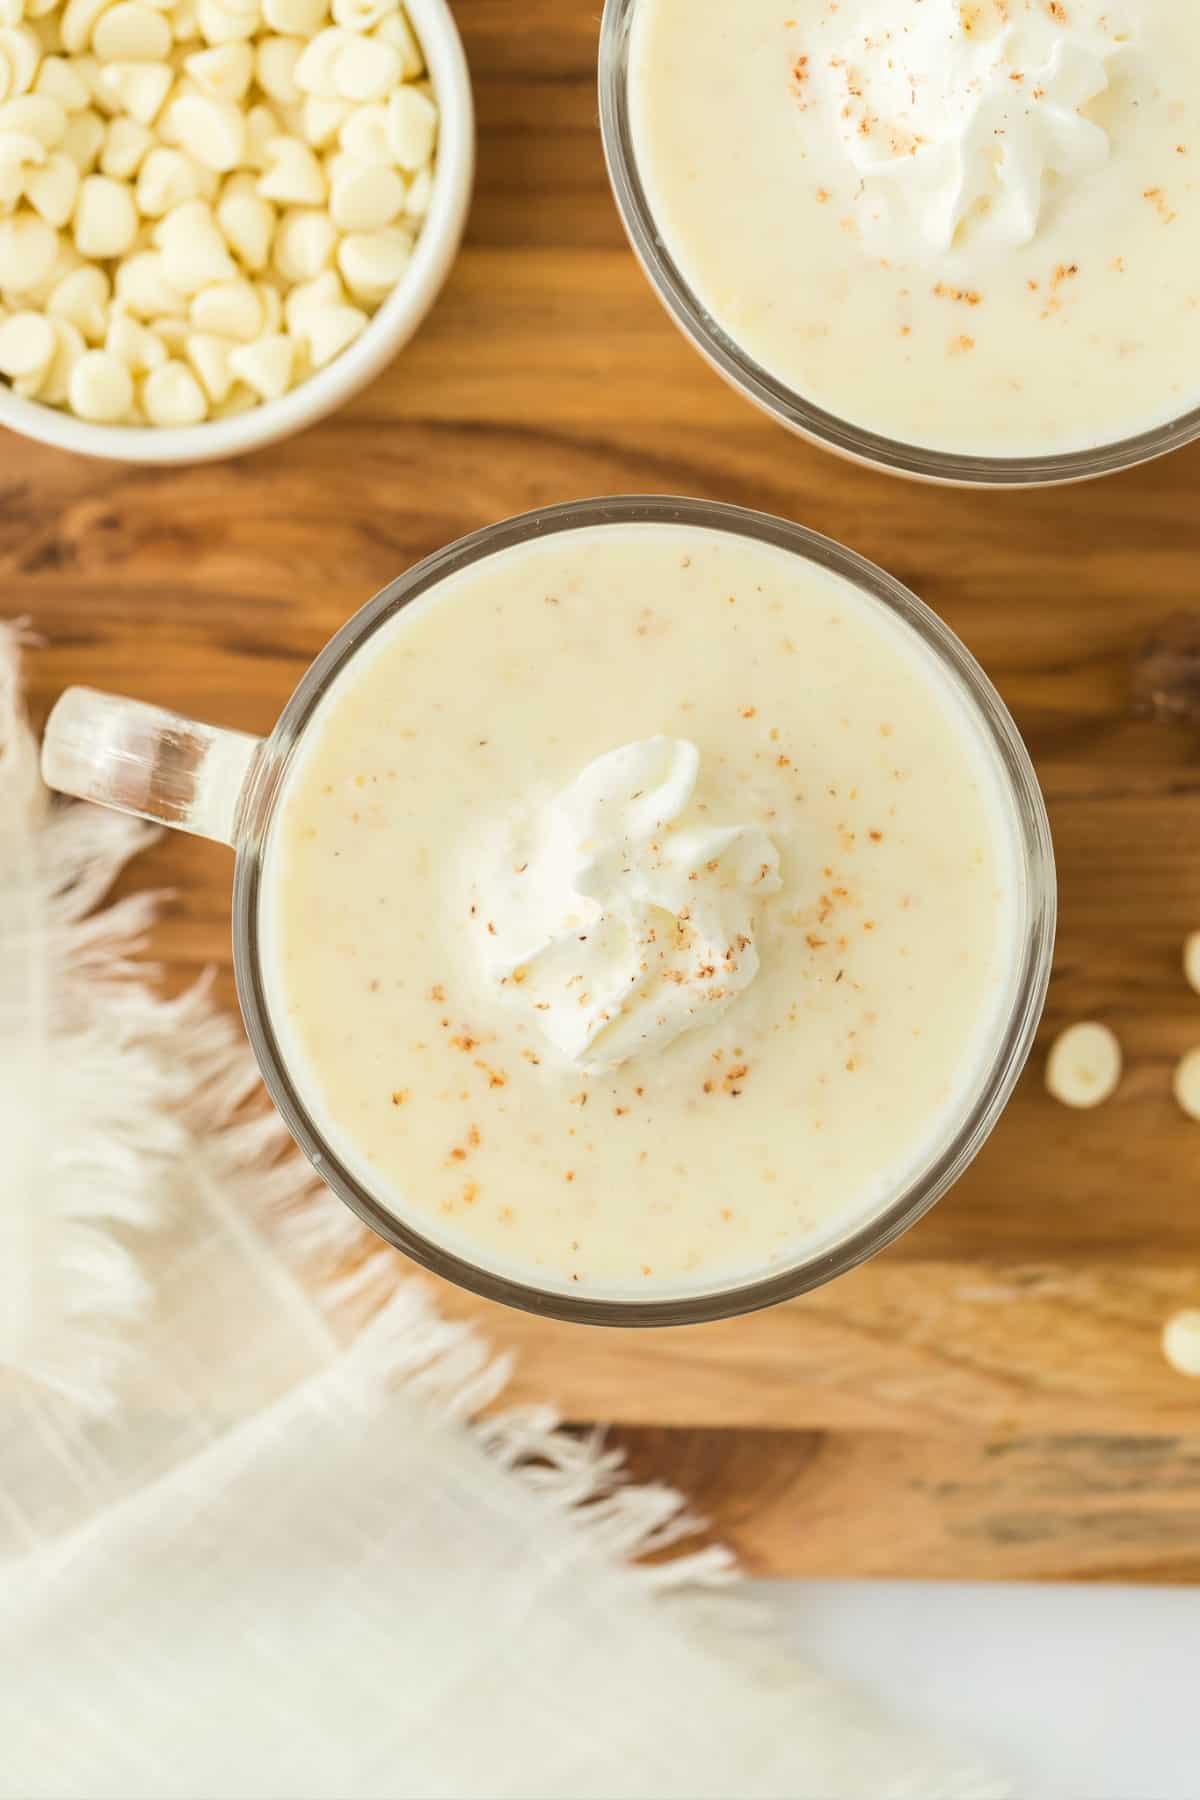 A mug of white hot chocolate topped with whipped cream surrounded by another mug and a bowl of white chocolate chips.